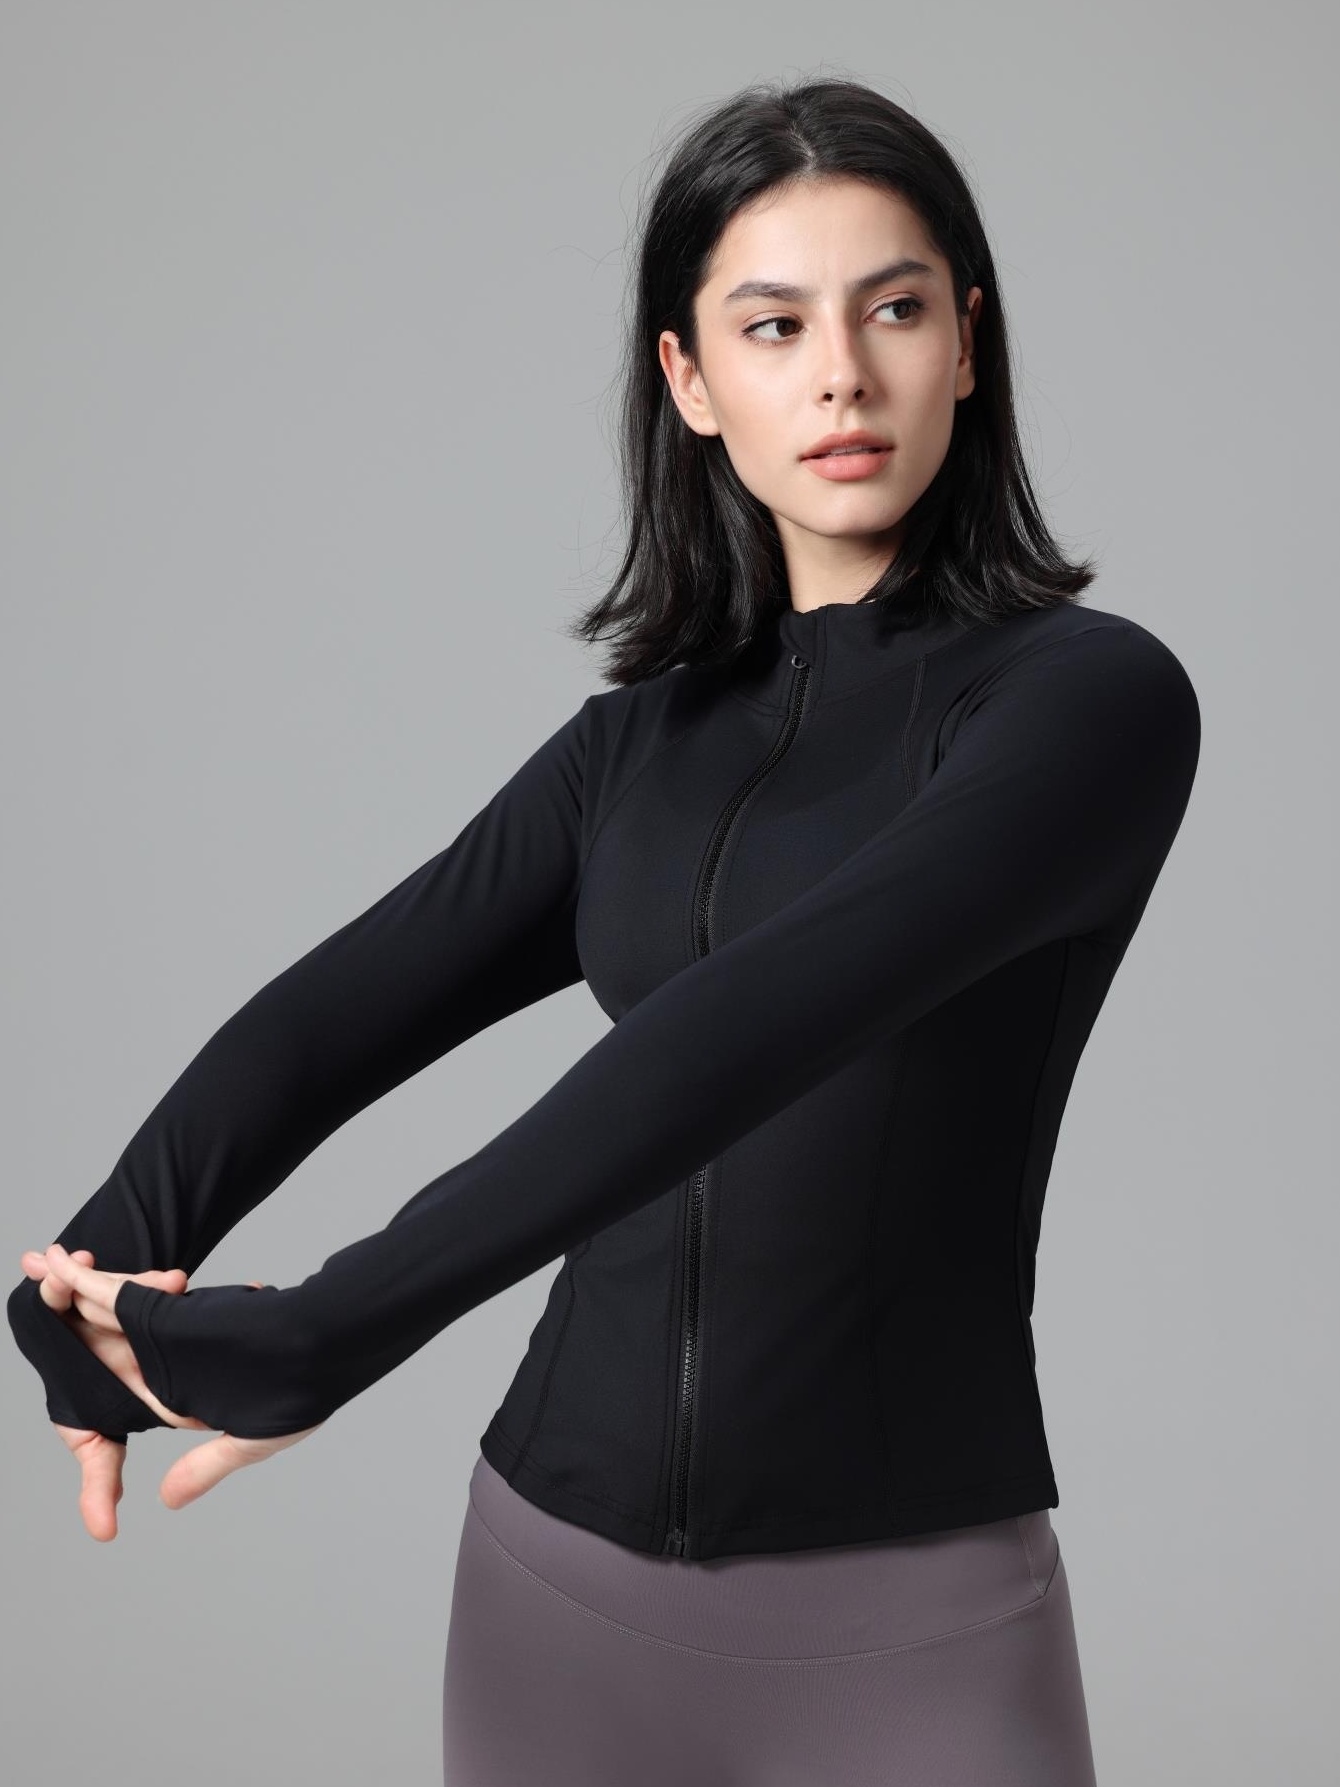 Women's Slim Fit Workout Running Sports Jackets, Full Zip-up Yoga